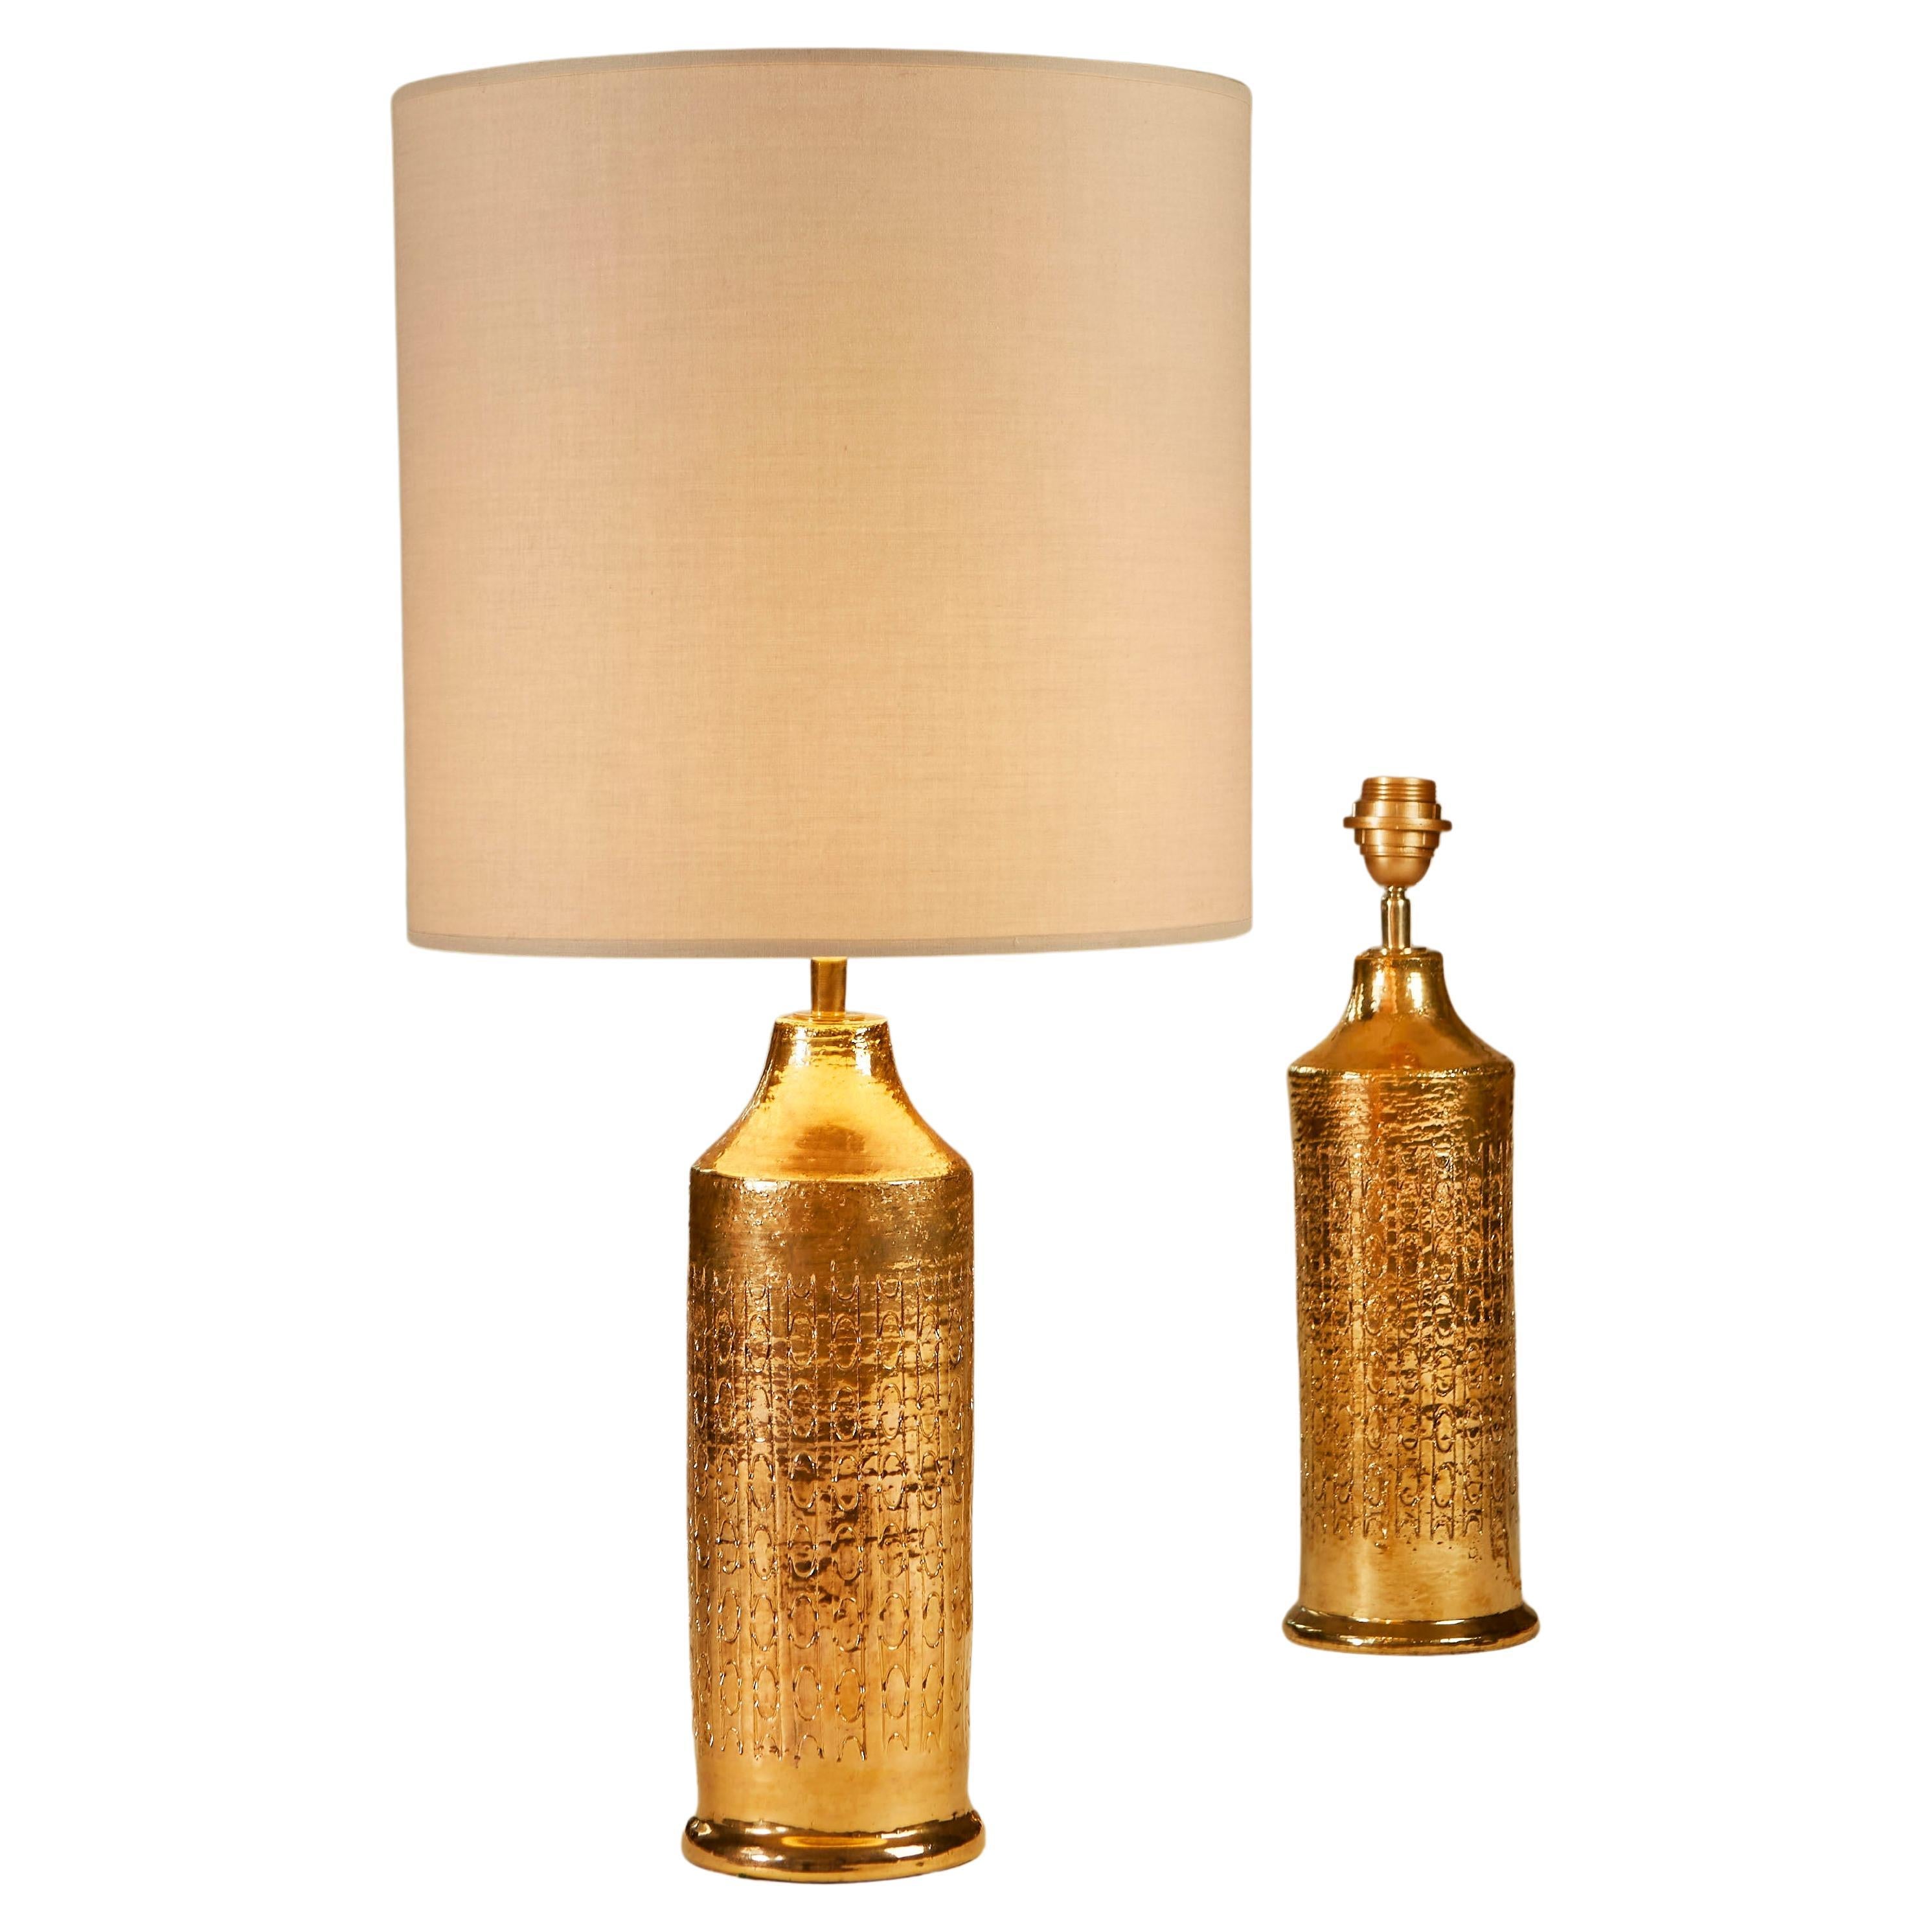 Pair of 1960s Swedish Gold Ceramic Table Lamps from Bitossi by Bergboms For Sale